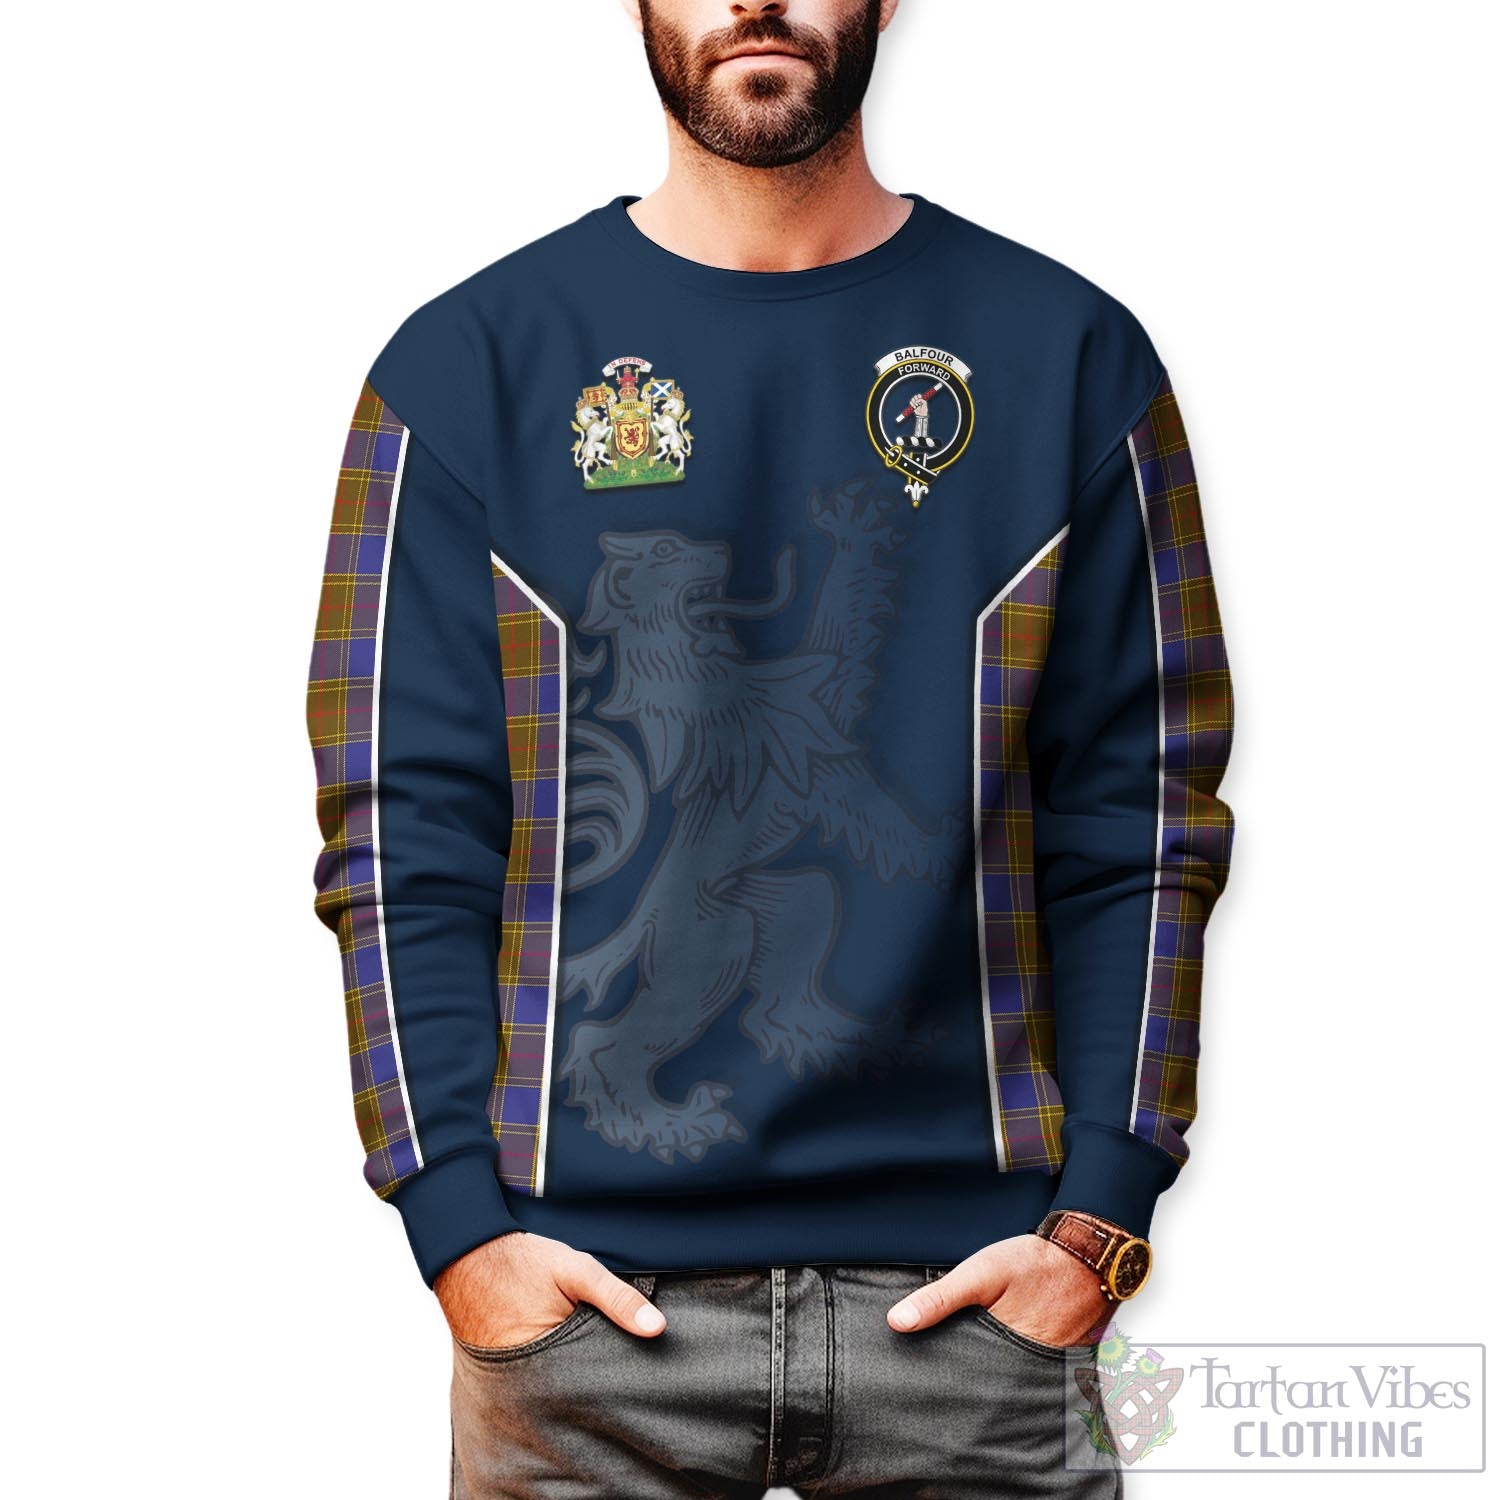 Tartan Vibes Clothing Balfour Modern Tartan Sweater with Family Crest and Lion Rampant Vibes Sport Style